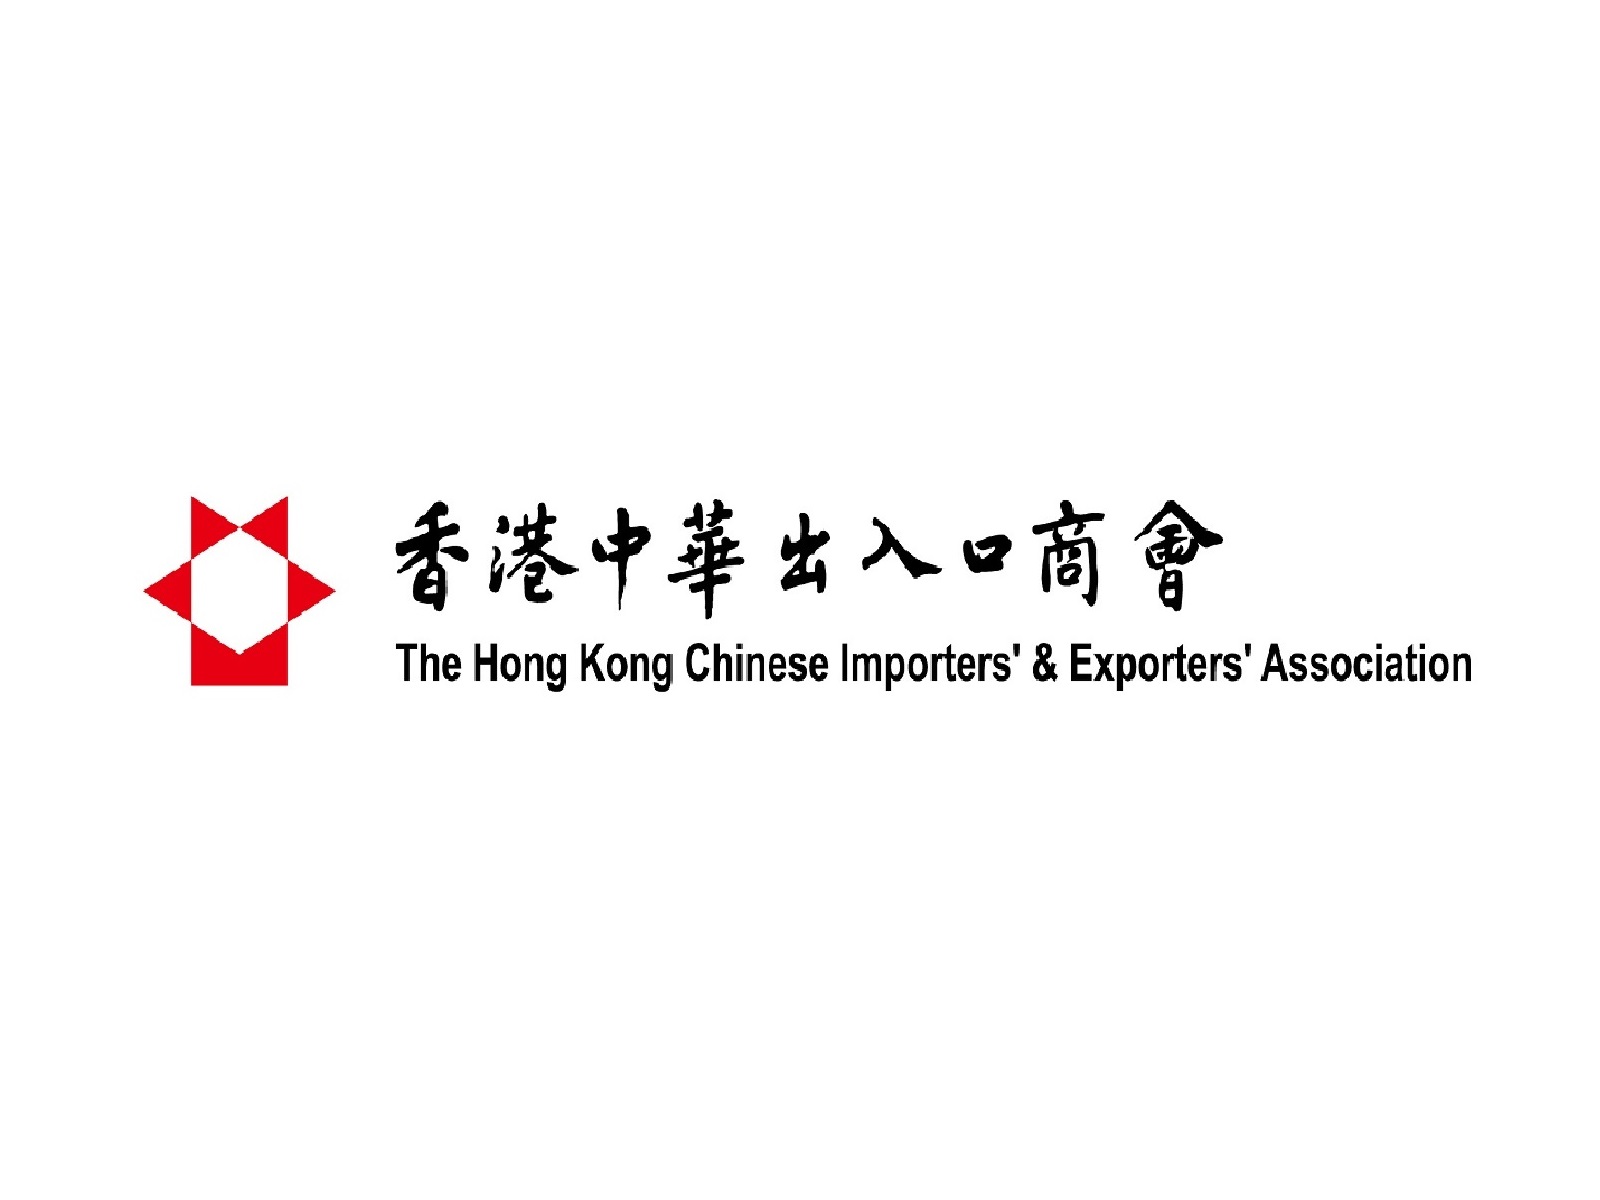 The Hong Kong Chinese Importers’ & Exporters’ Association